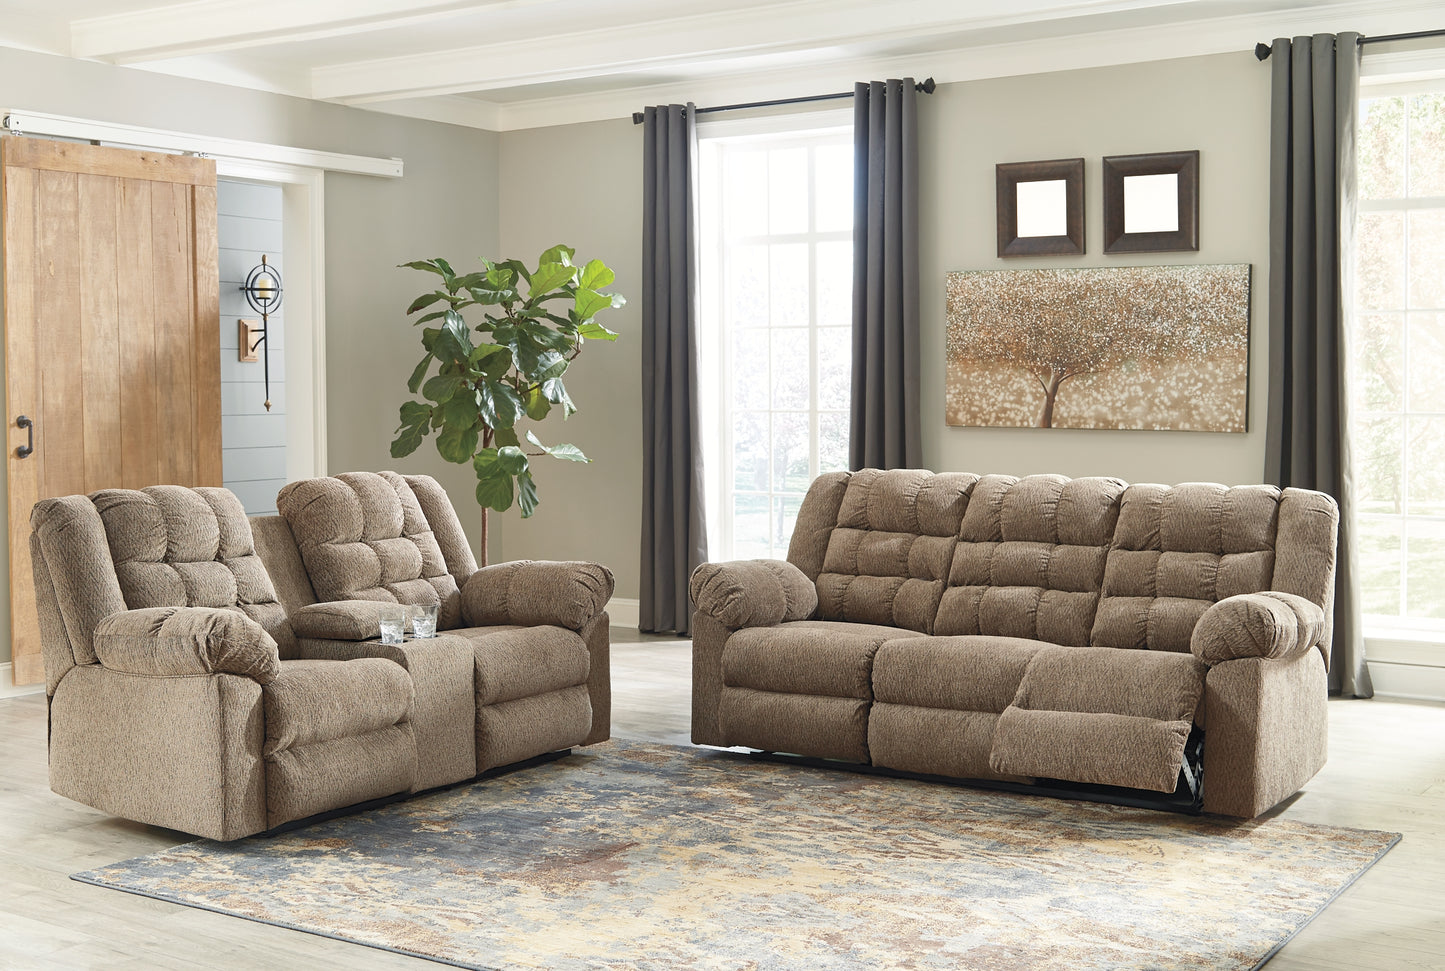 Workhorse Sofa and Loveseat